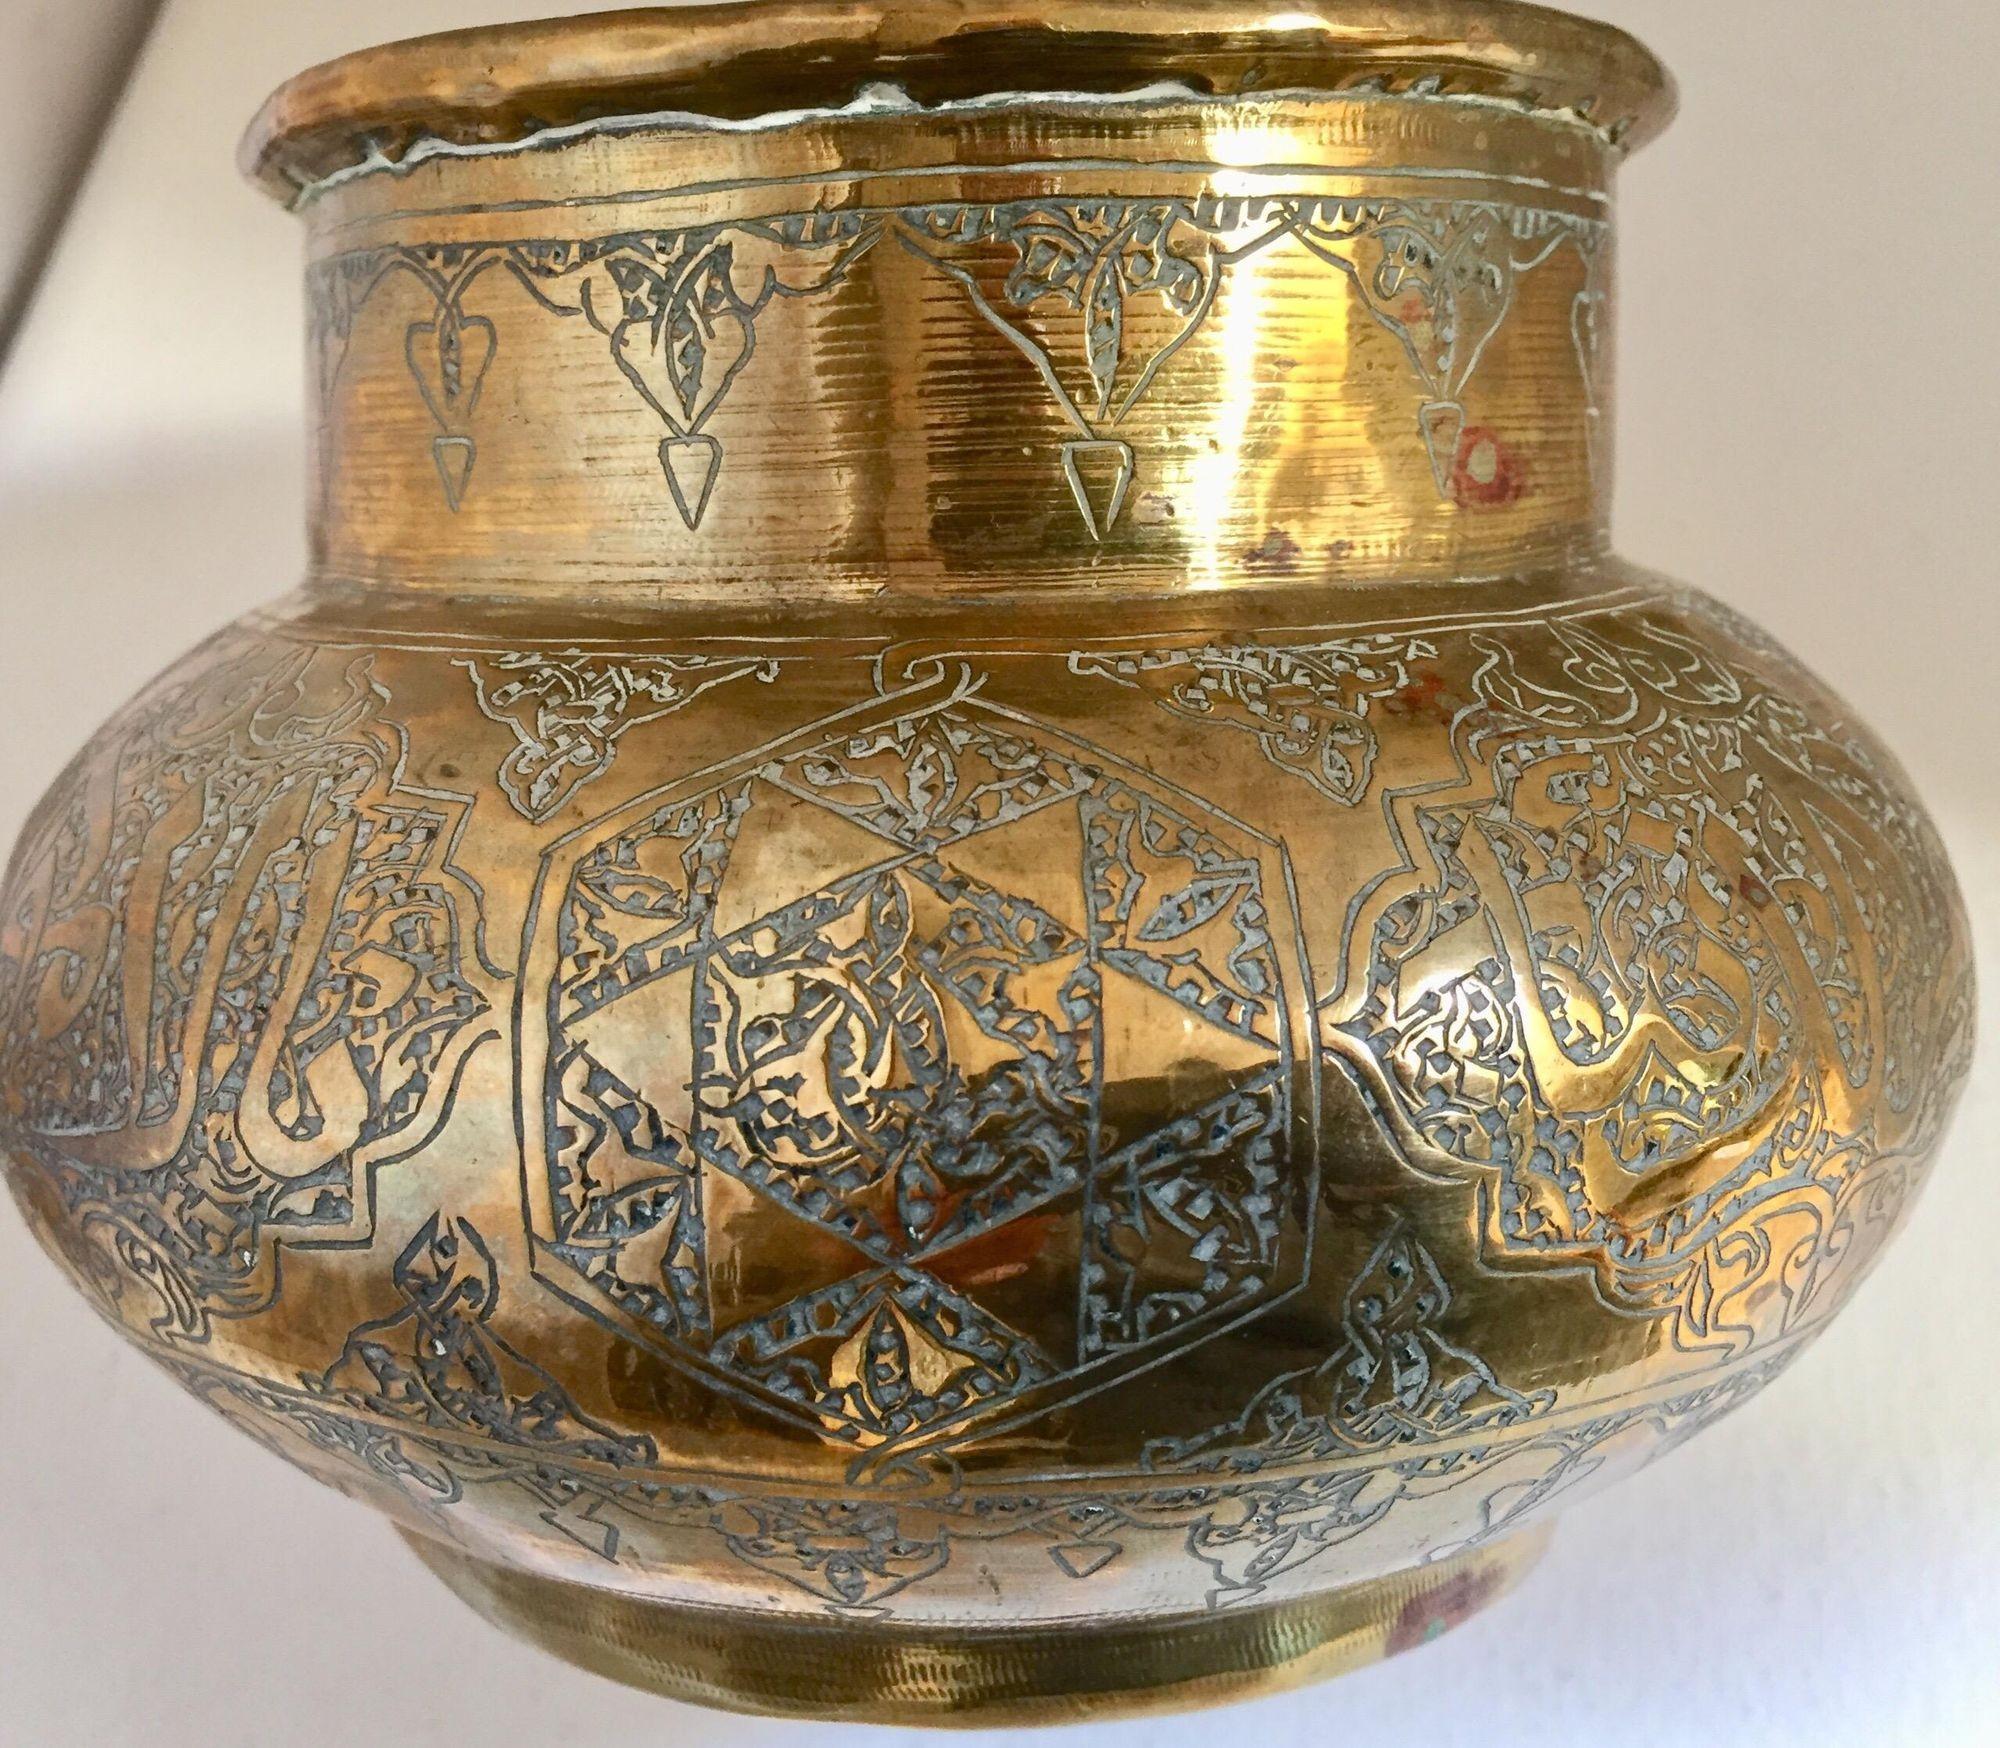 Brass Middle Eastern Egyptian Islamic bowl finely and heavily hand-etched and hand carved with Arabic calligraphy writing inscriptions.
Islamic hand-etched Moorish style brass vessel.
Engraved and hand-chased Arabic Islamic calligraphy and geometric